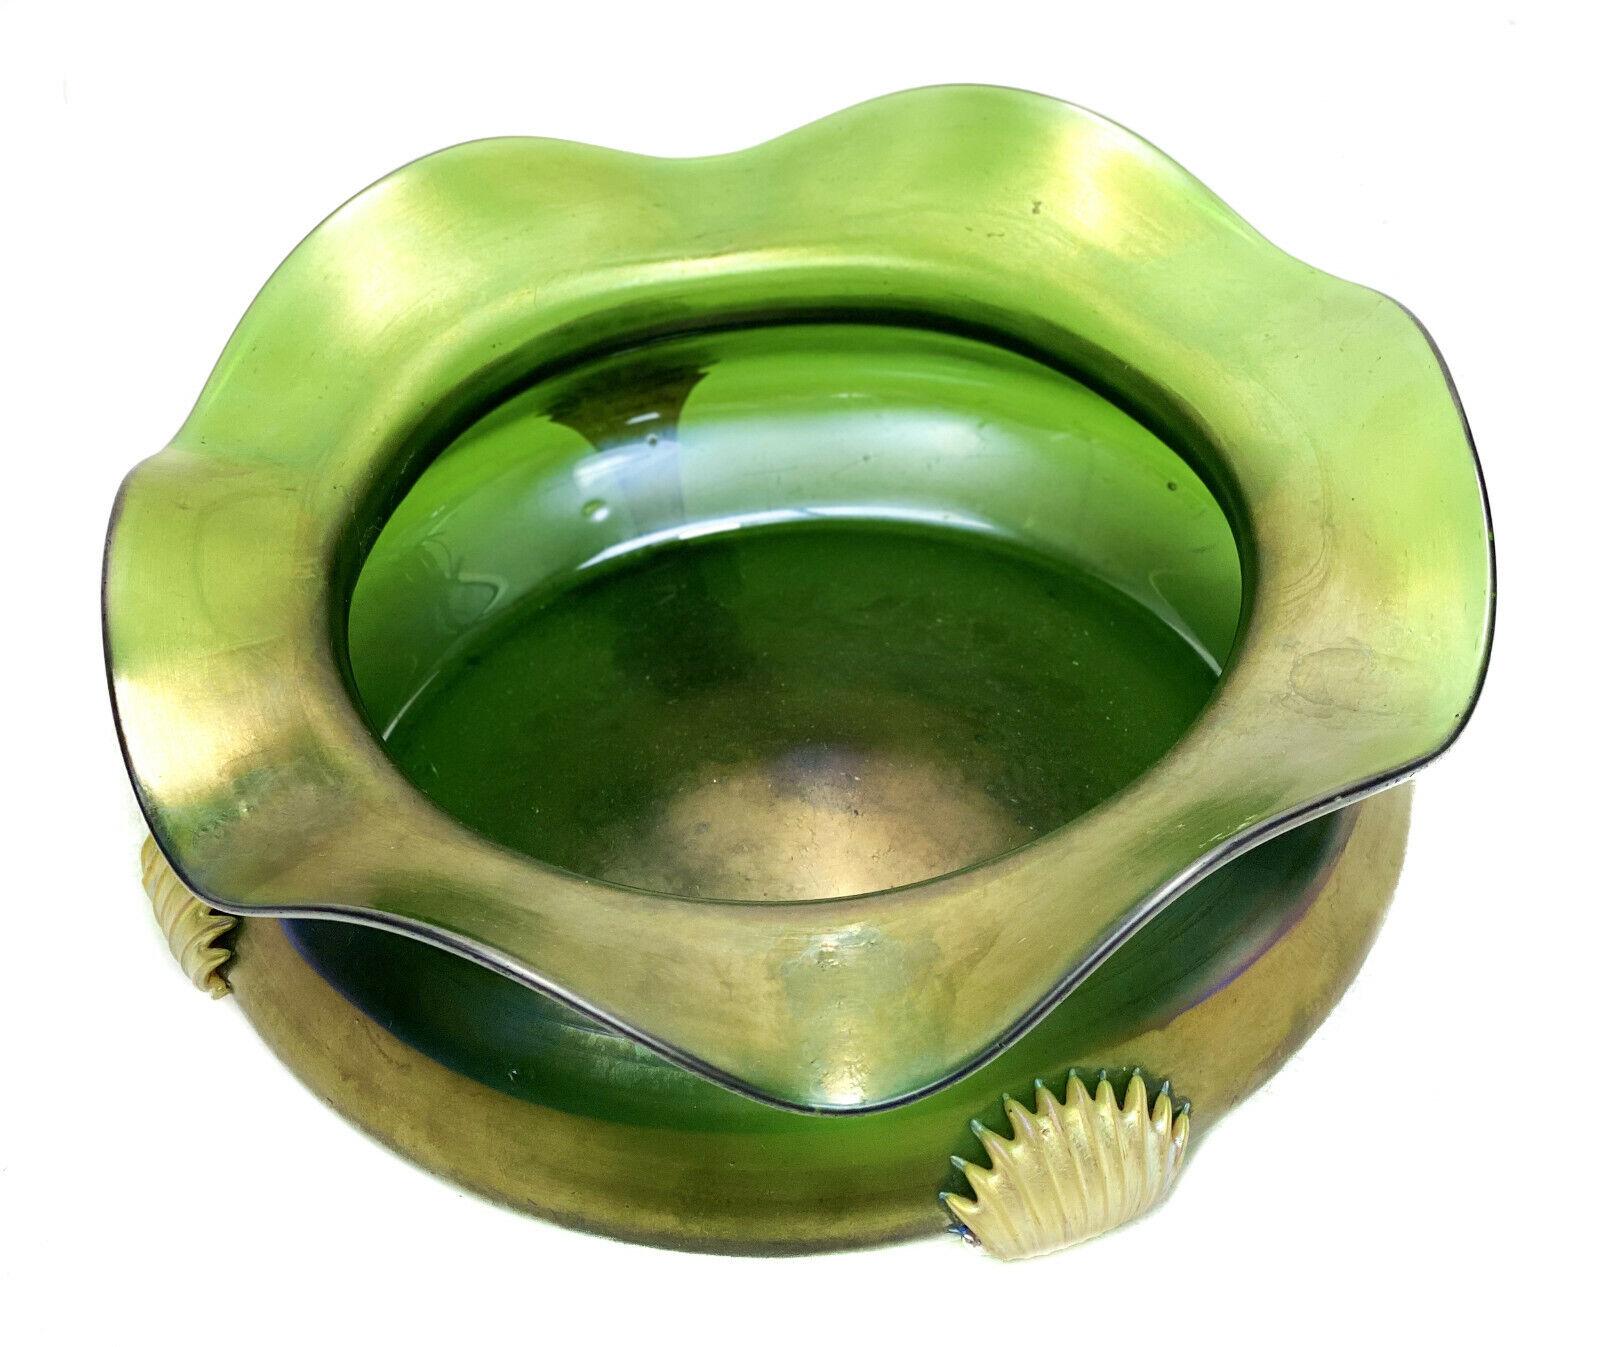 Green Iridescent Art glass bowl w Applied Tendrils, early 20th century

Applied gold fleck tendrils with pointed ends to the exterior of the bowl. Rippled rim to the bowl. Polished pontil to the underside base. Unmarked, the tendrils reminiscent